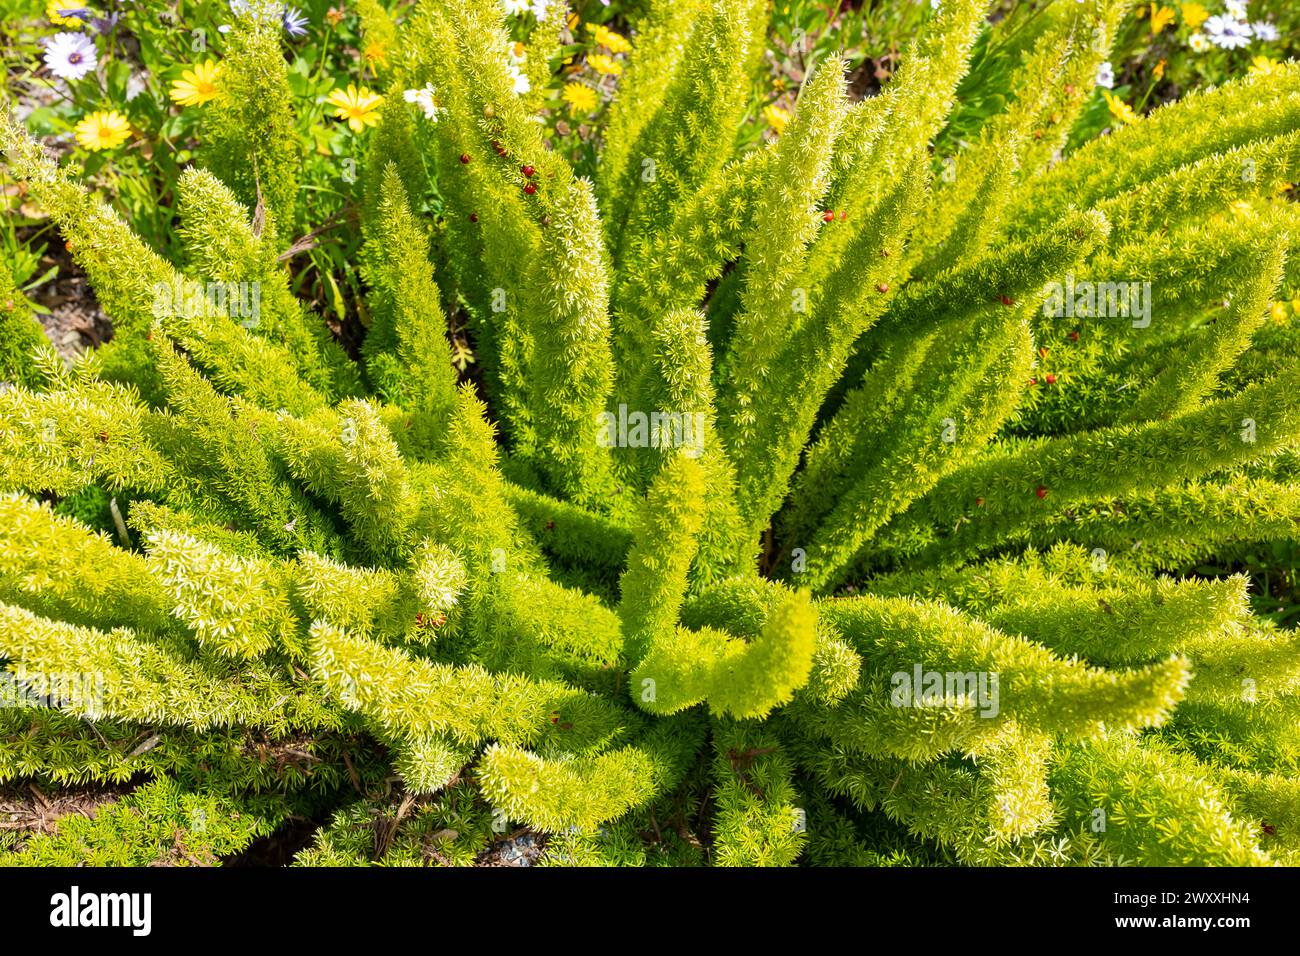 Green Foxtail Fern, Asparagus densiflorus Meyeri with Fruits, Seeds or Red Berries Outdoor. Indoor Plant or Annual Garden Plant. Gardening, Landscape Stock Photo